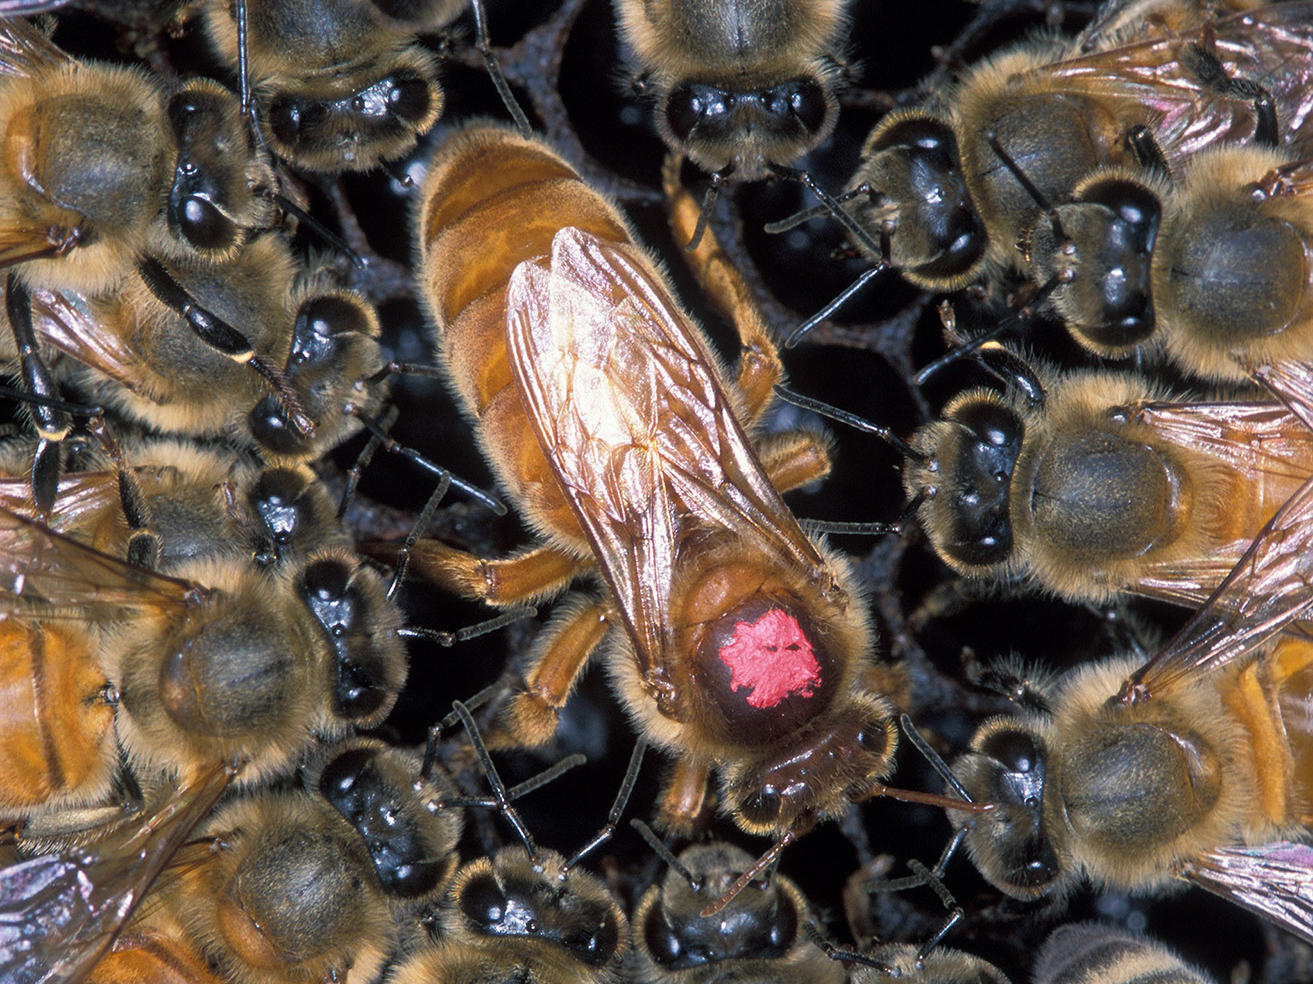 Fig. 6. A European honey bee queen (shown with red dot) surrounded by Africanized honey bees.